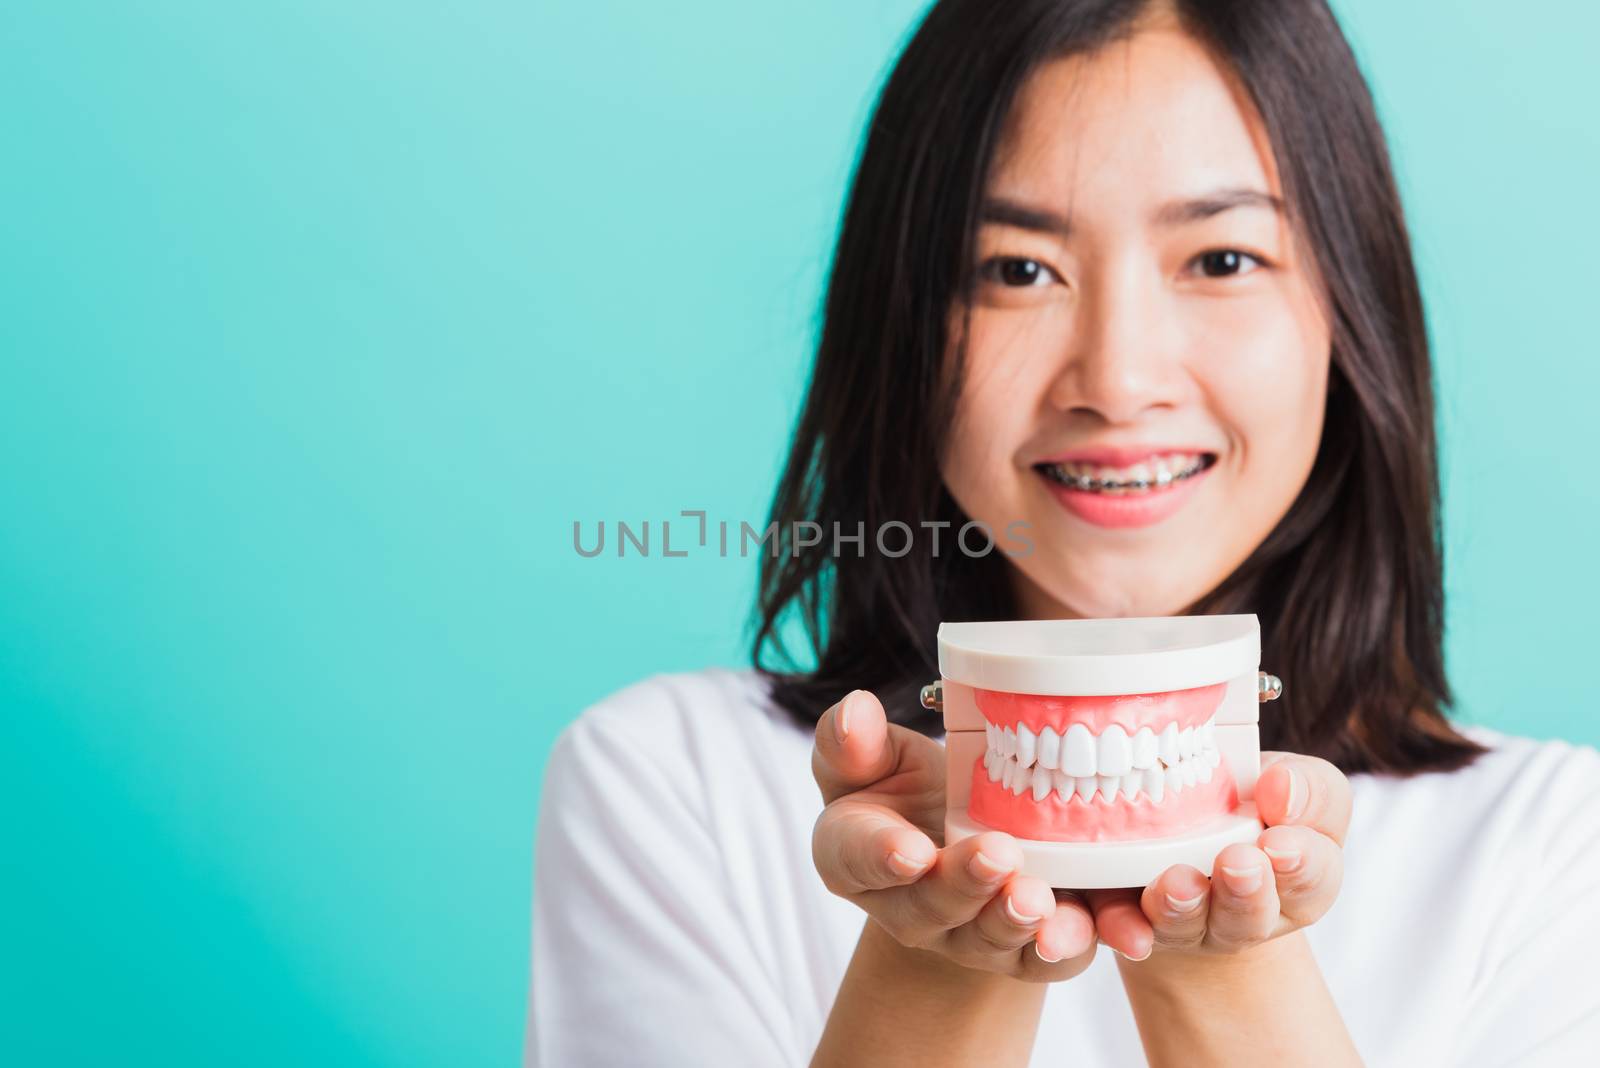 woman smile have dental braces on teeth laughing she holding med by Sorapop